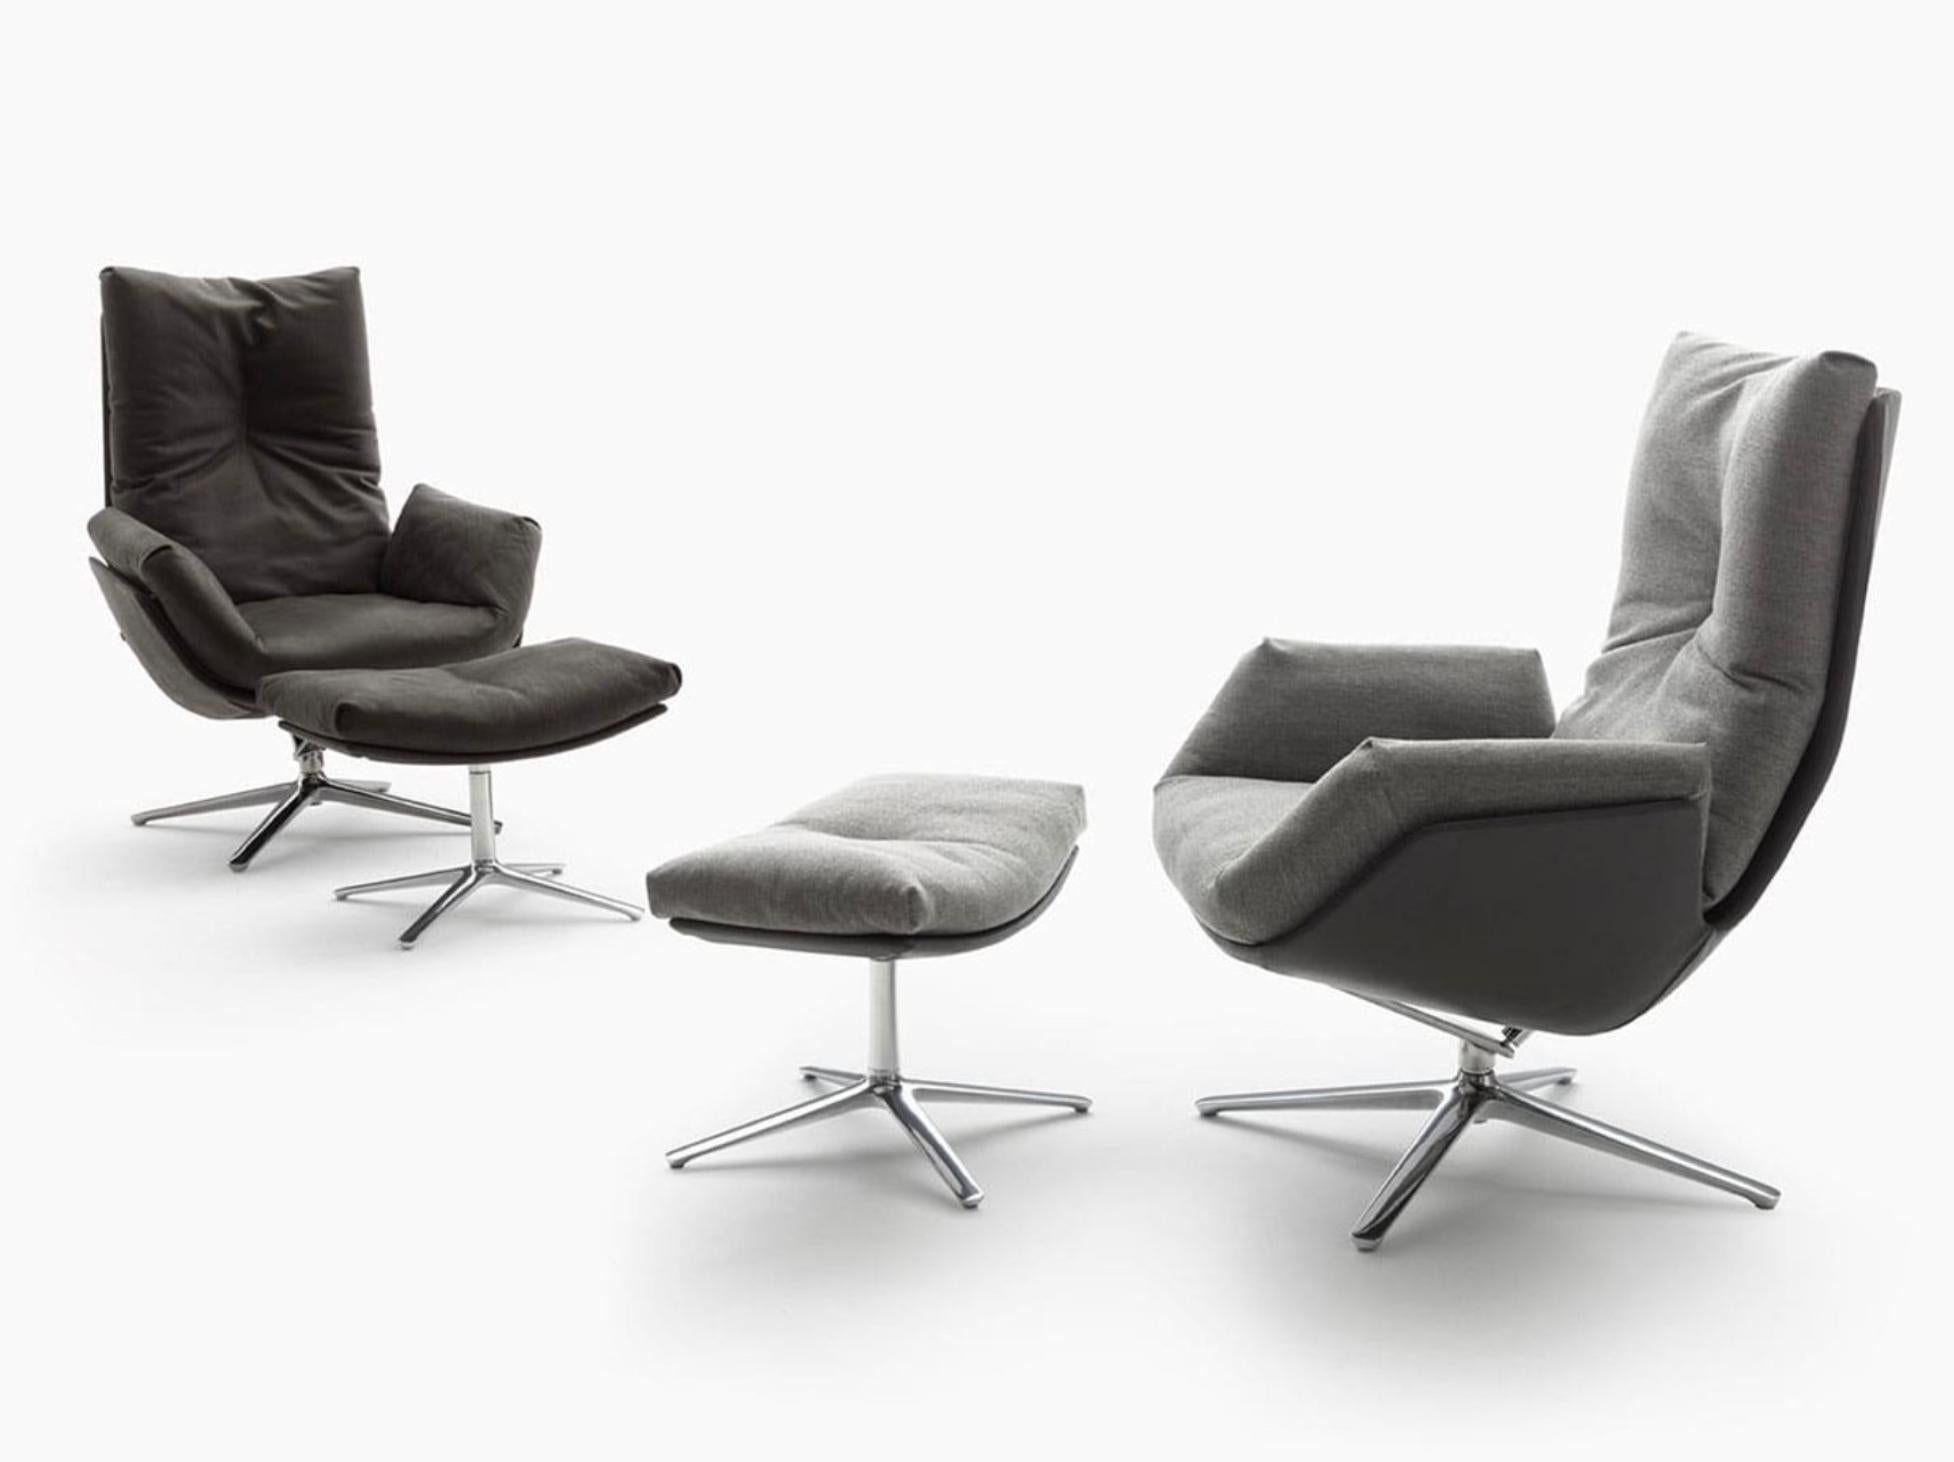 The Cordia swivel lounge chair comes in fabric, leather or a combination of the two materials. The five star base is in polished aluminium or in black brown or black of the COR collection. Match footstool available as well.